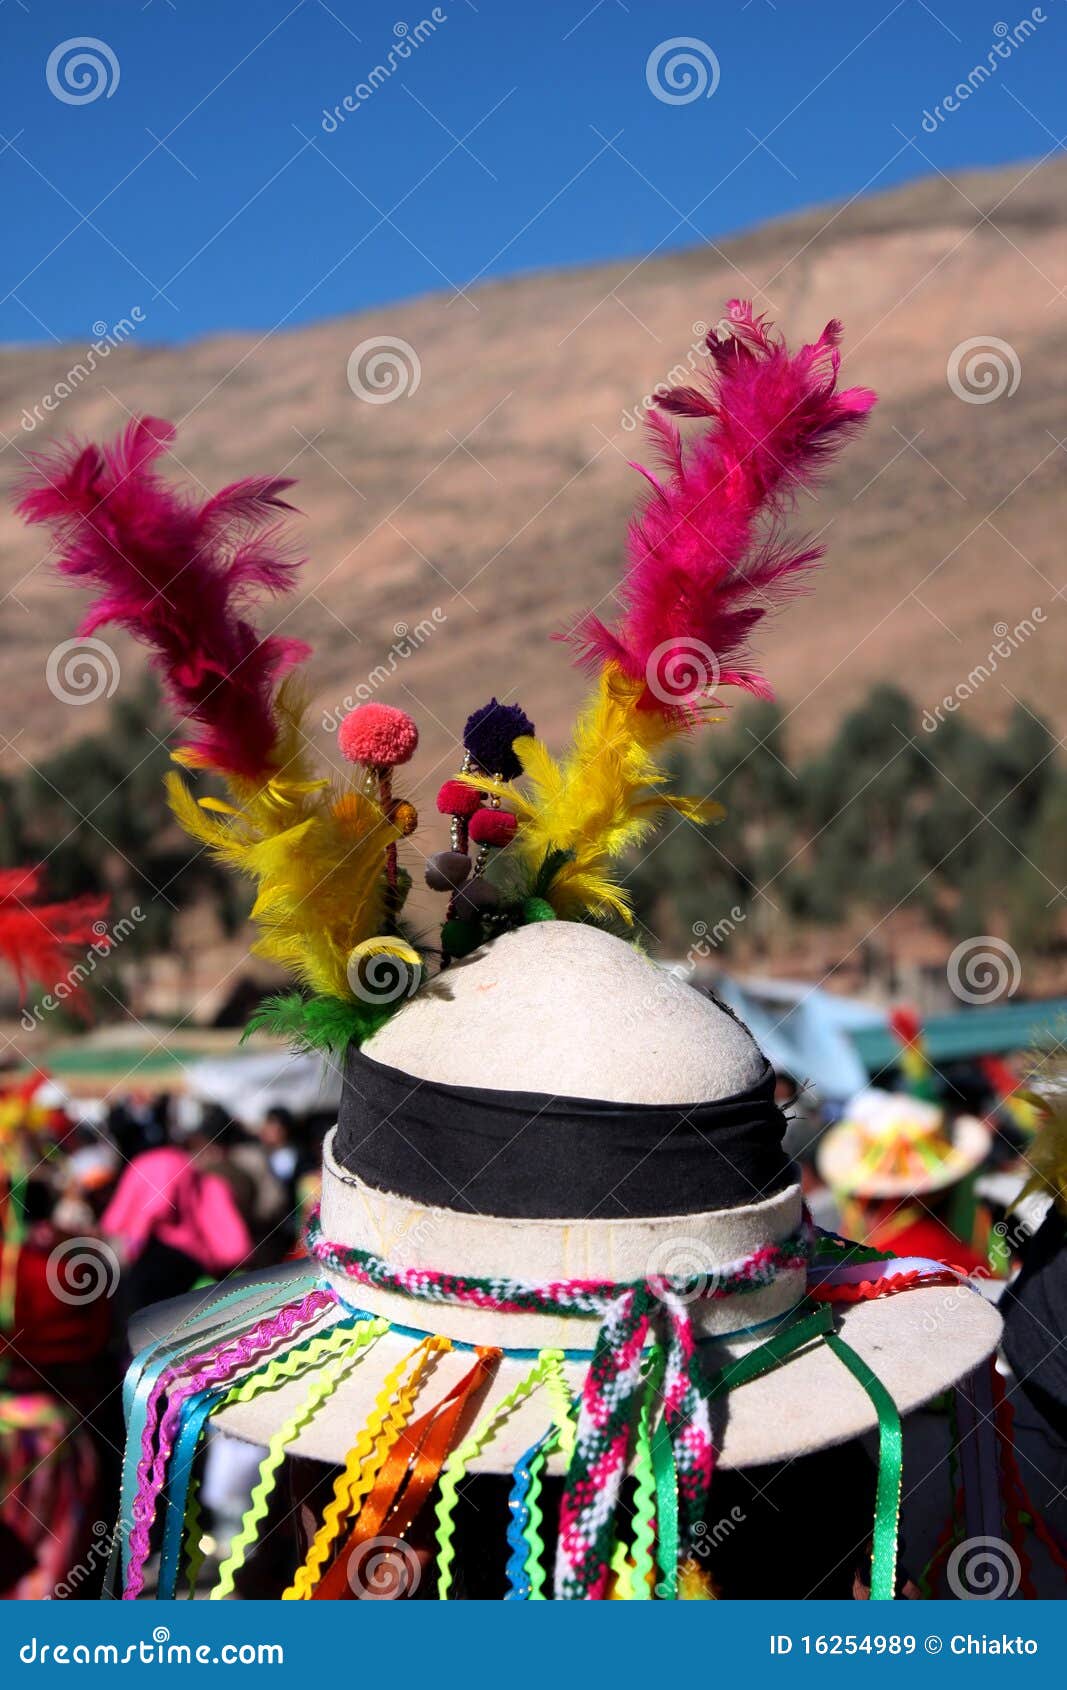 traditional bolivian hat